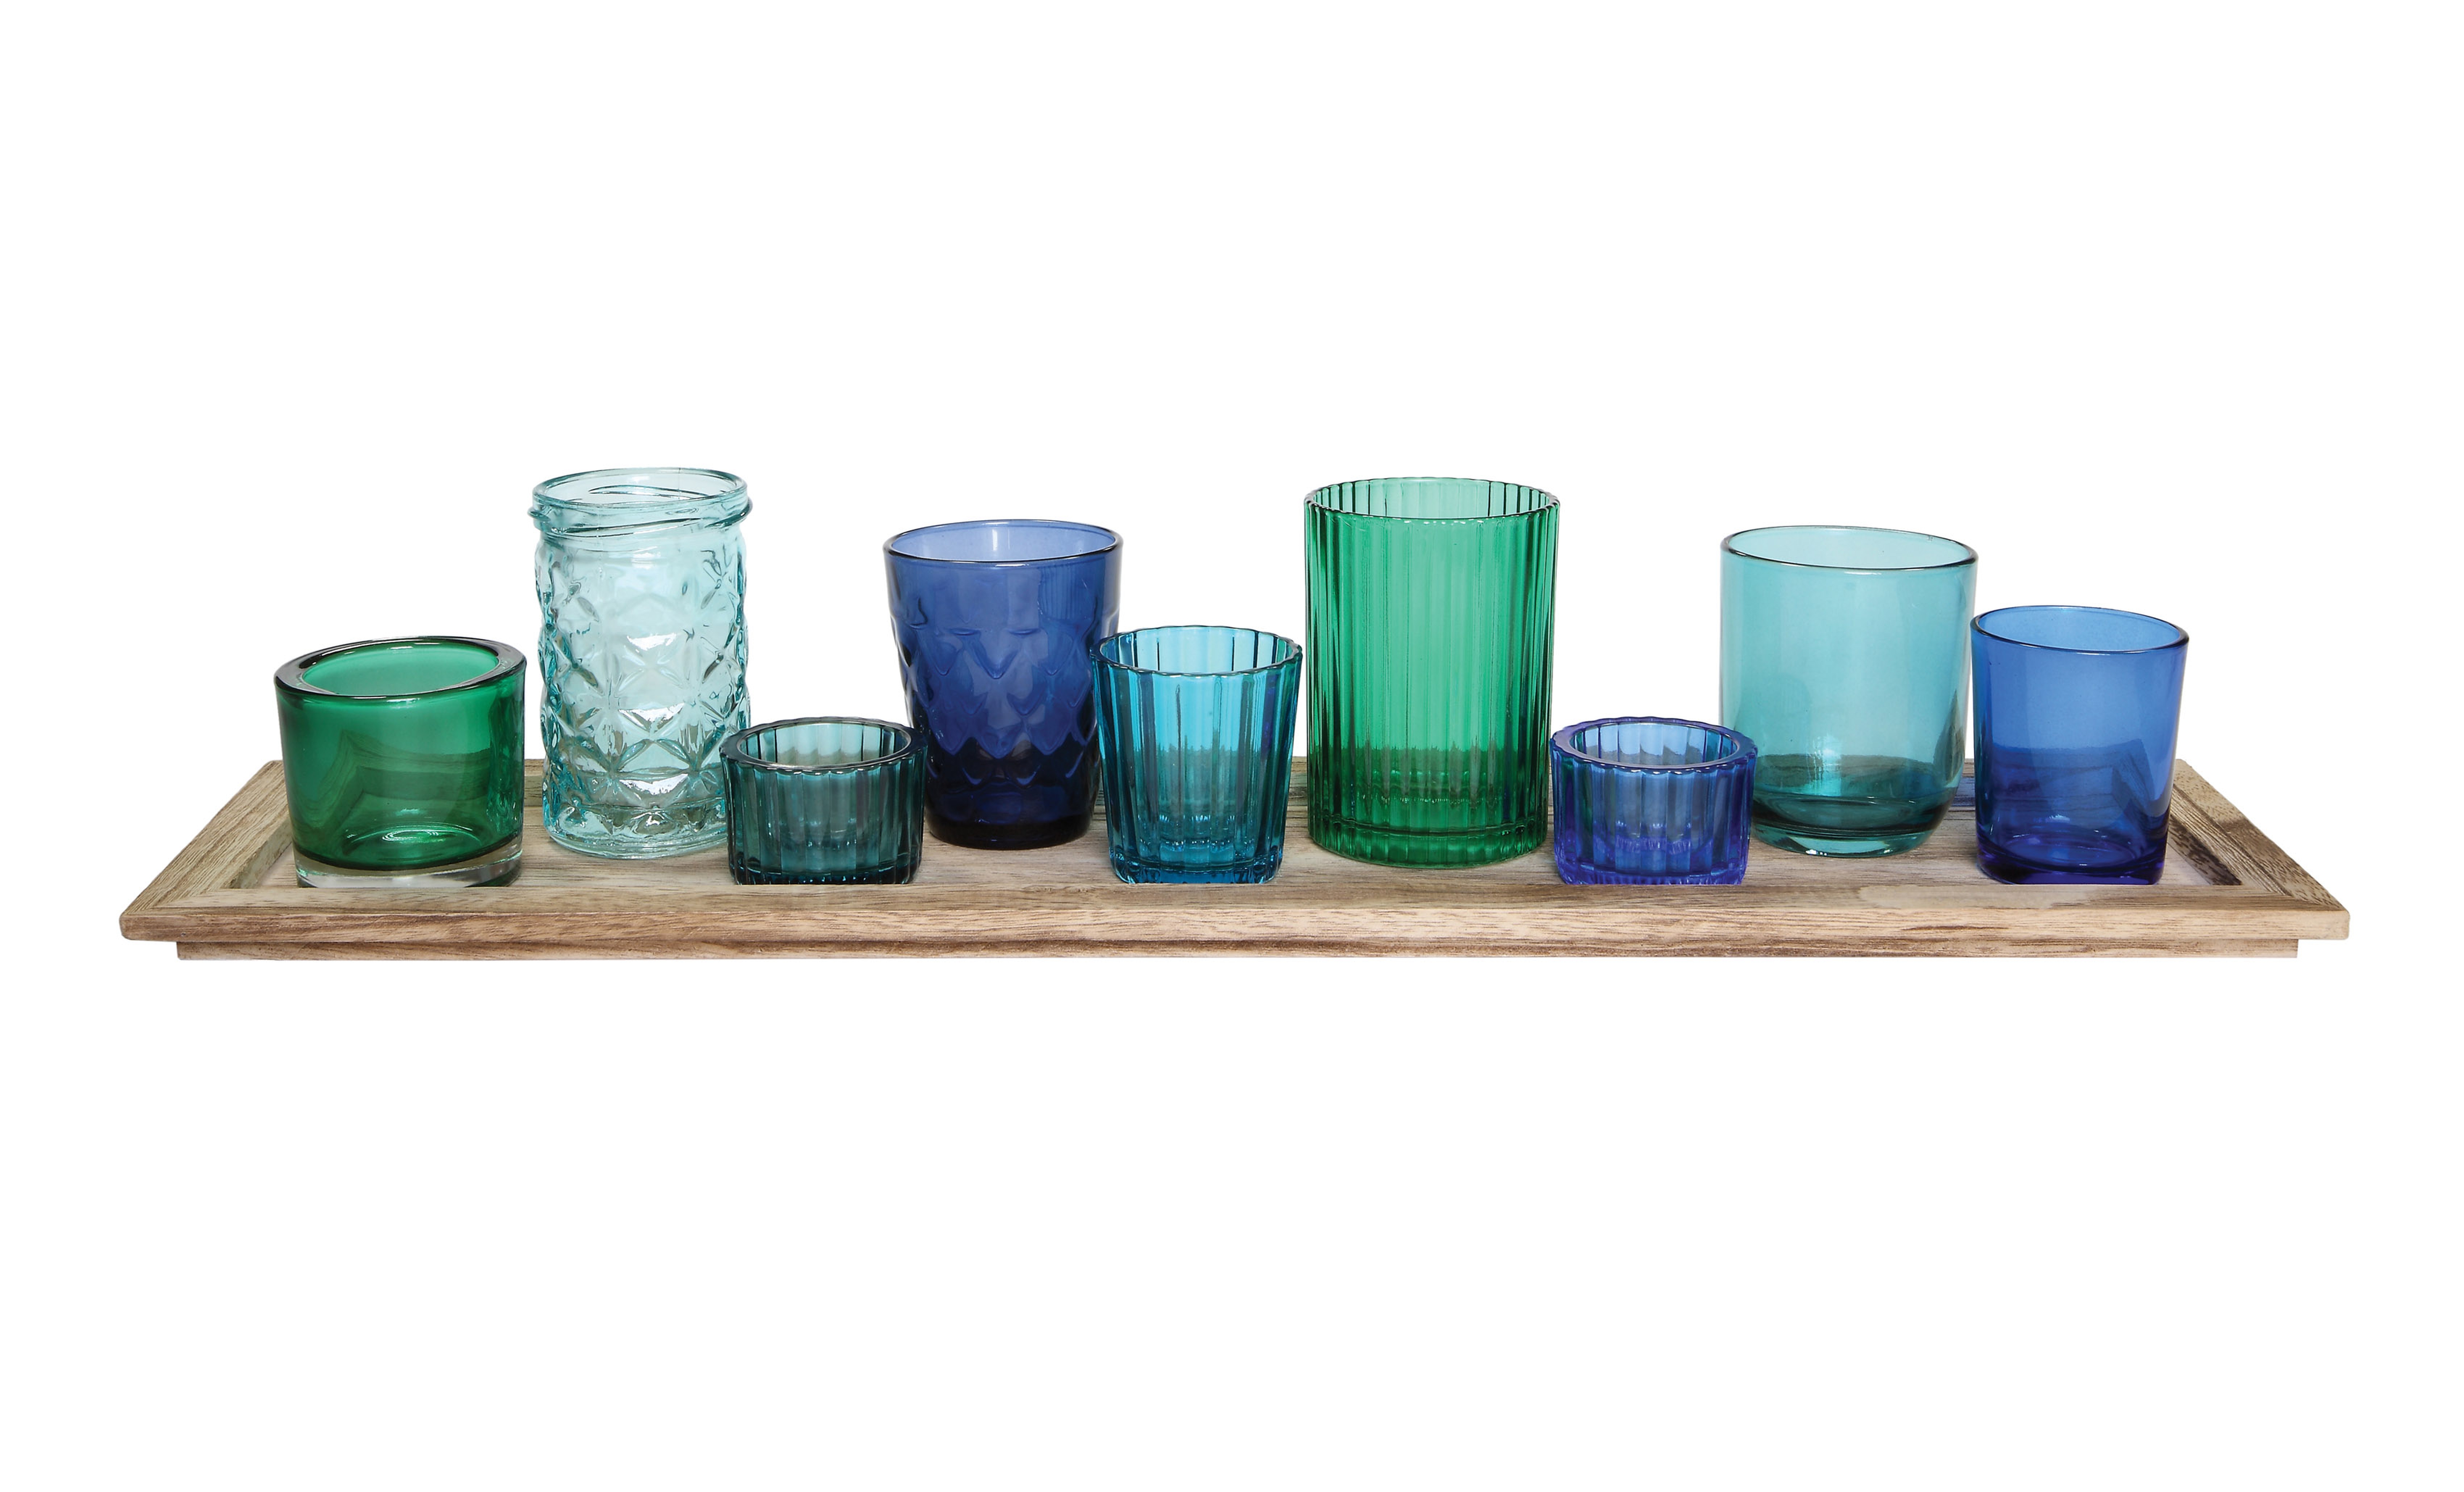 Wood Tray with 9 Blue & Green Glass Votive Holders (Set of 10 Pieces) - Nomad Home